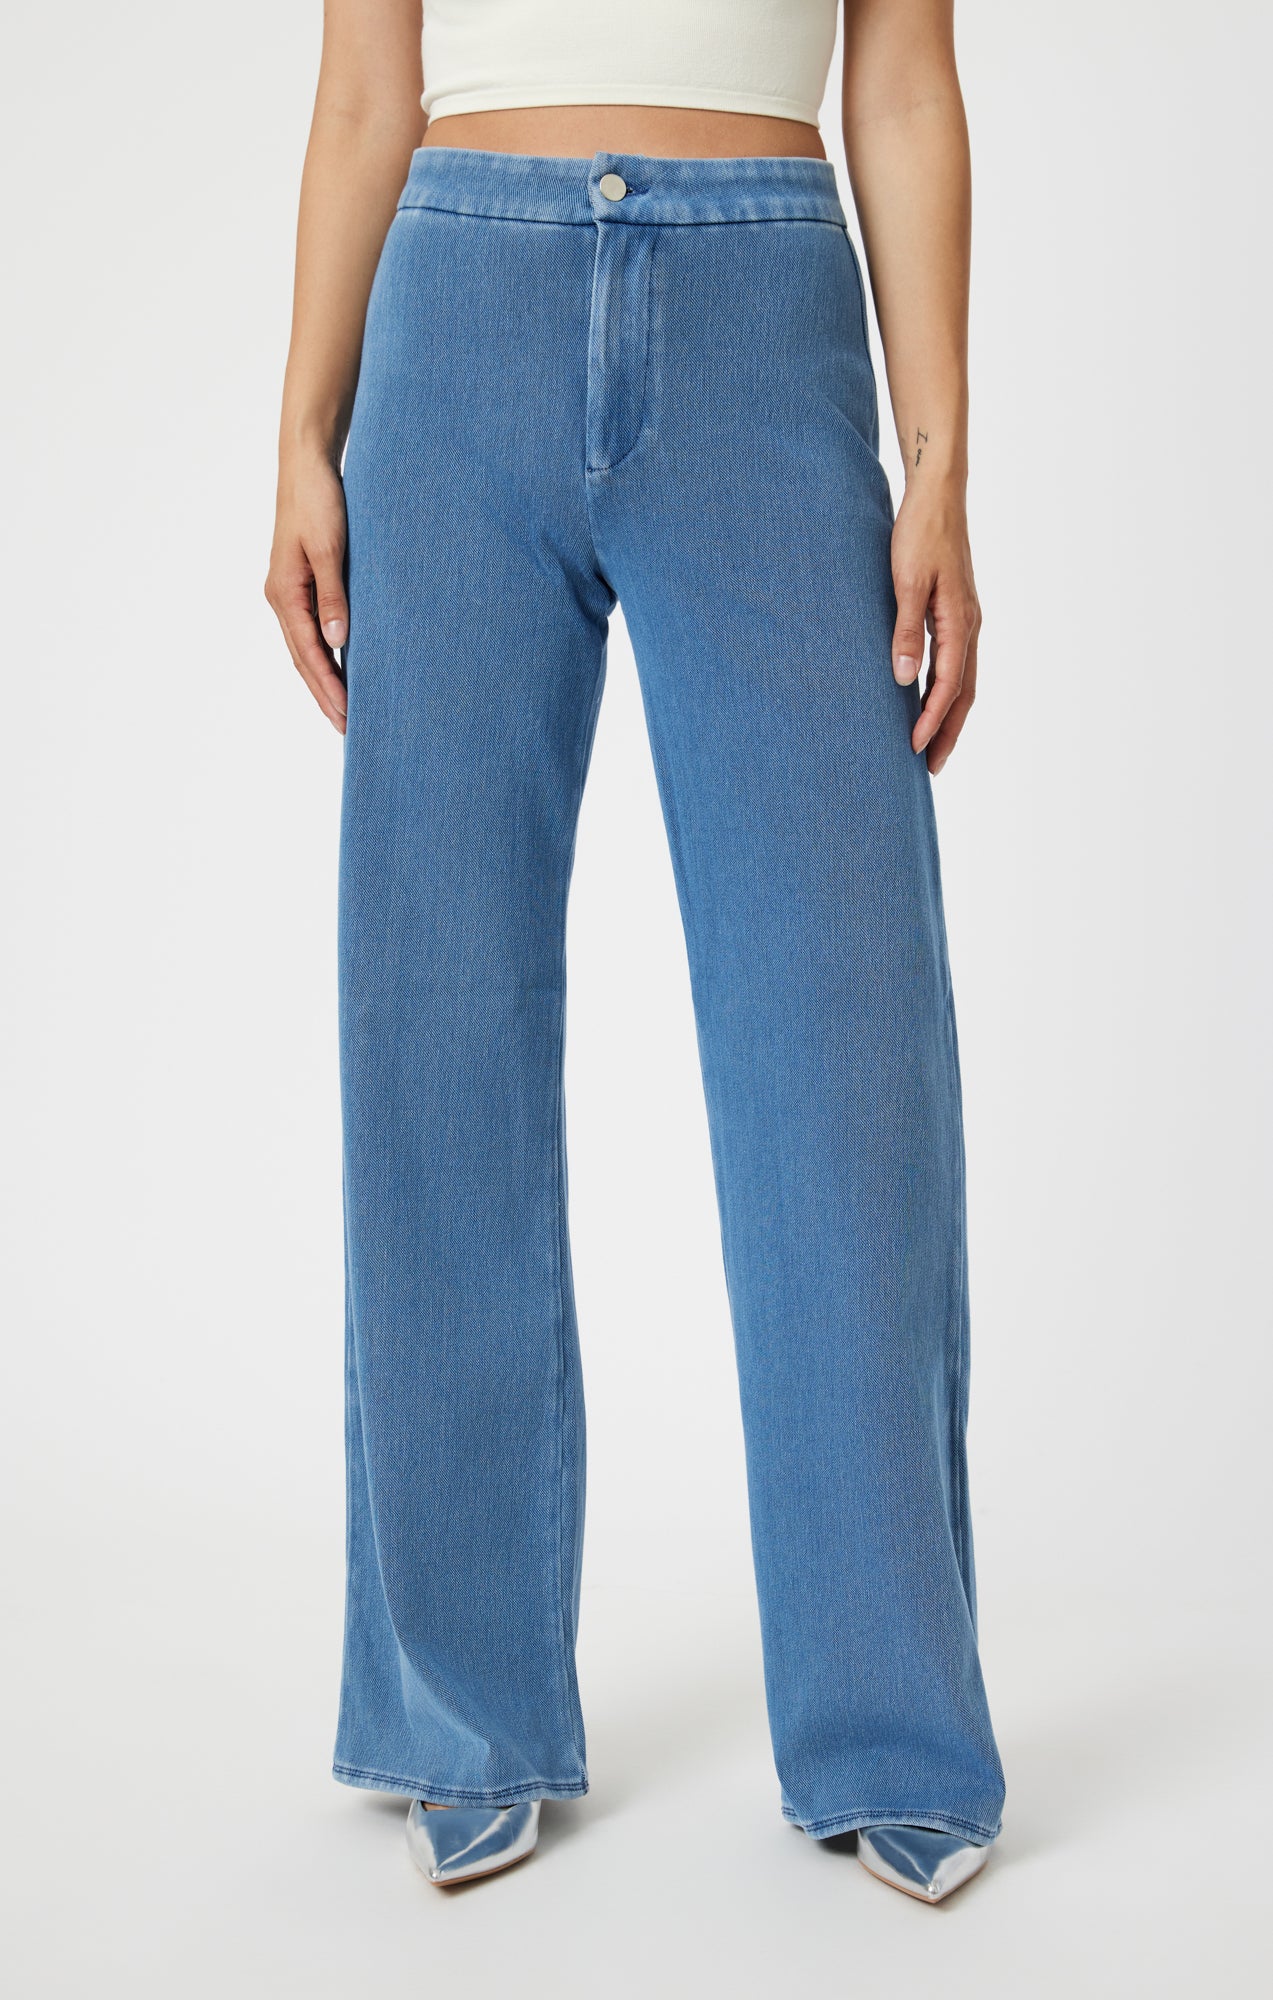 Deep In My Soul Flare Jeans - Medium Blue Wash  Flare jeans, Blue fashion,  High waisted denim